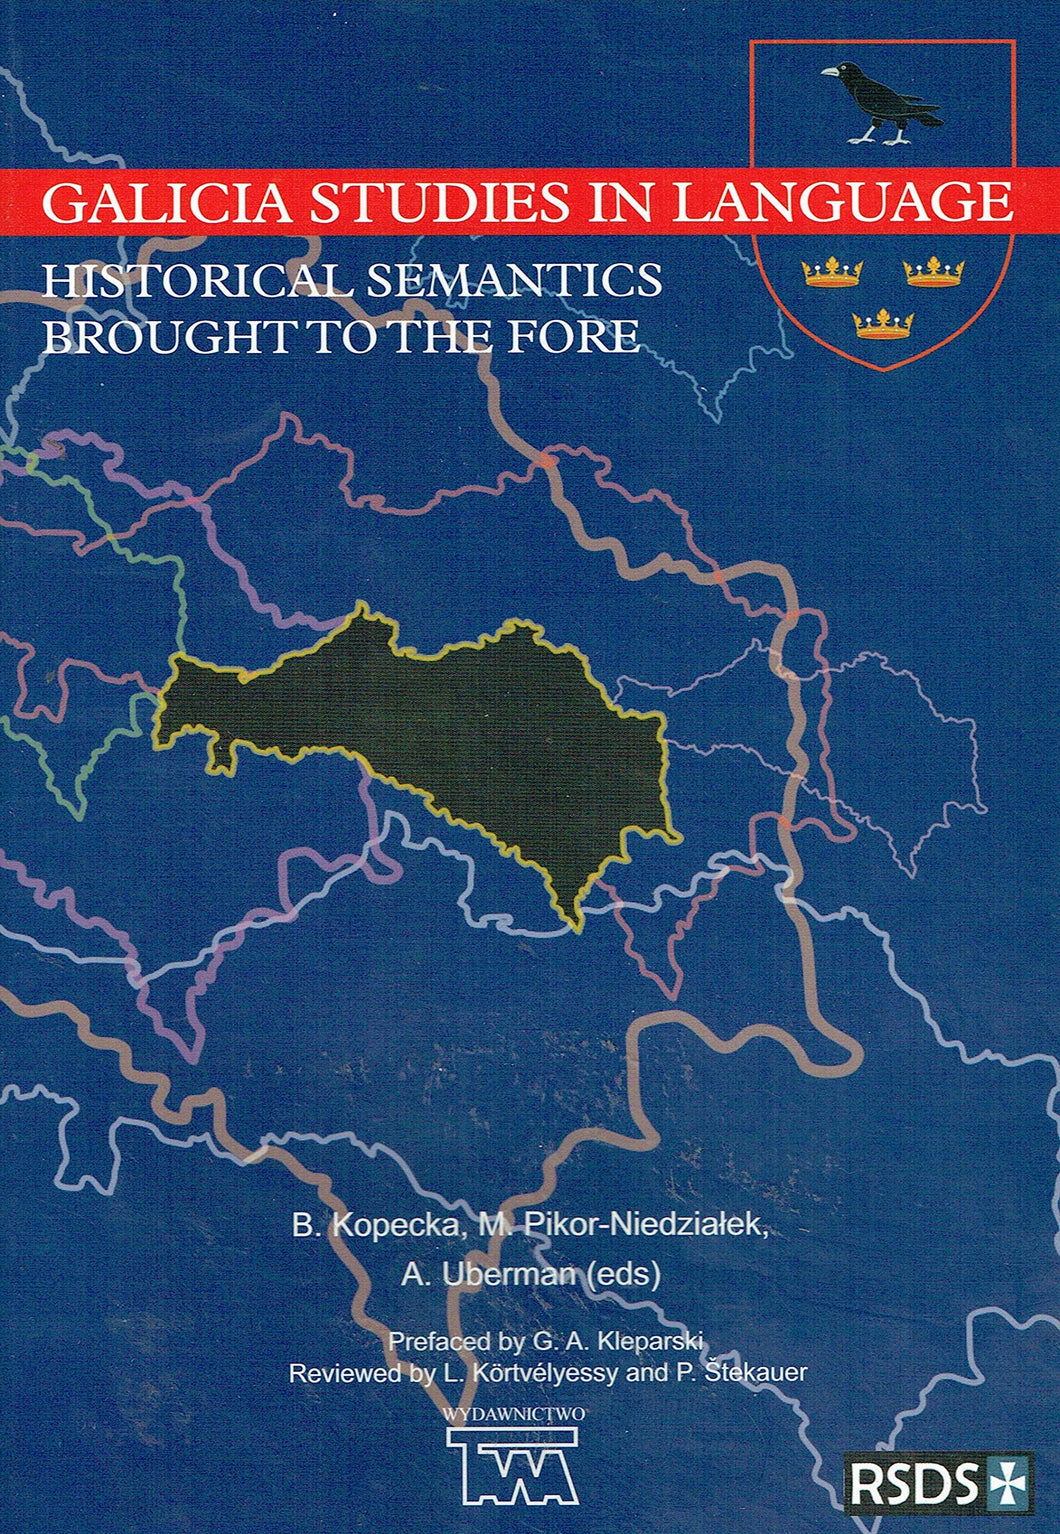 Galicia Studies in Language: Historical Semantics Brought to the Fore 2012